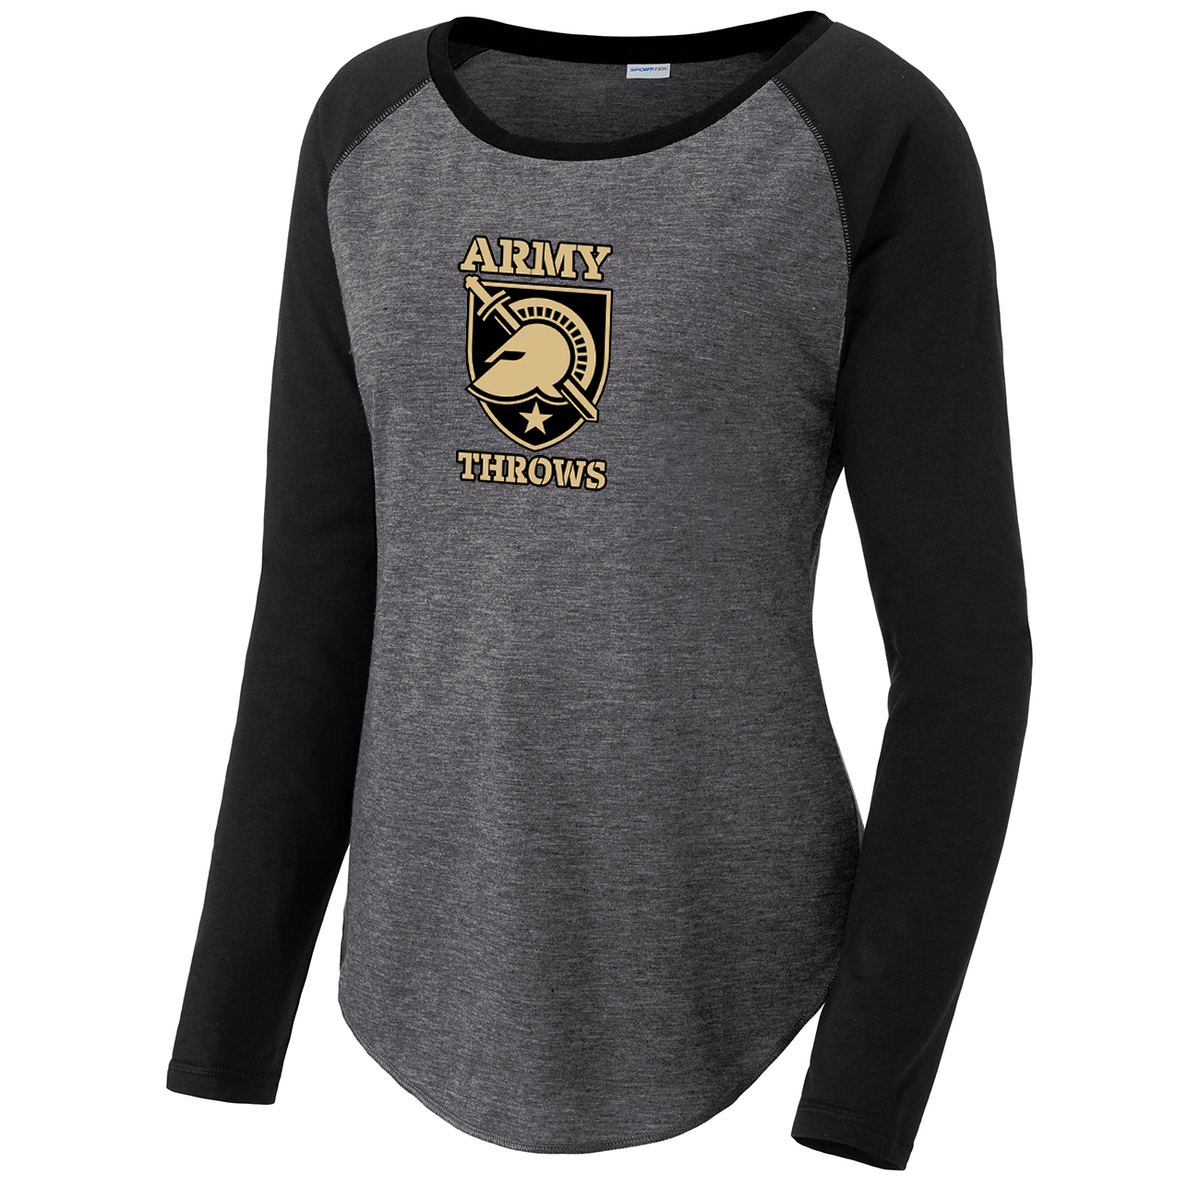 Army Throws Women's Raglan Long Sleeve CottonTouch